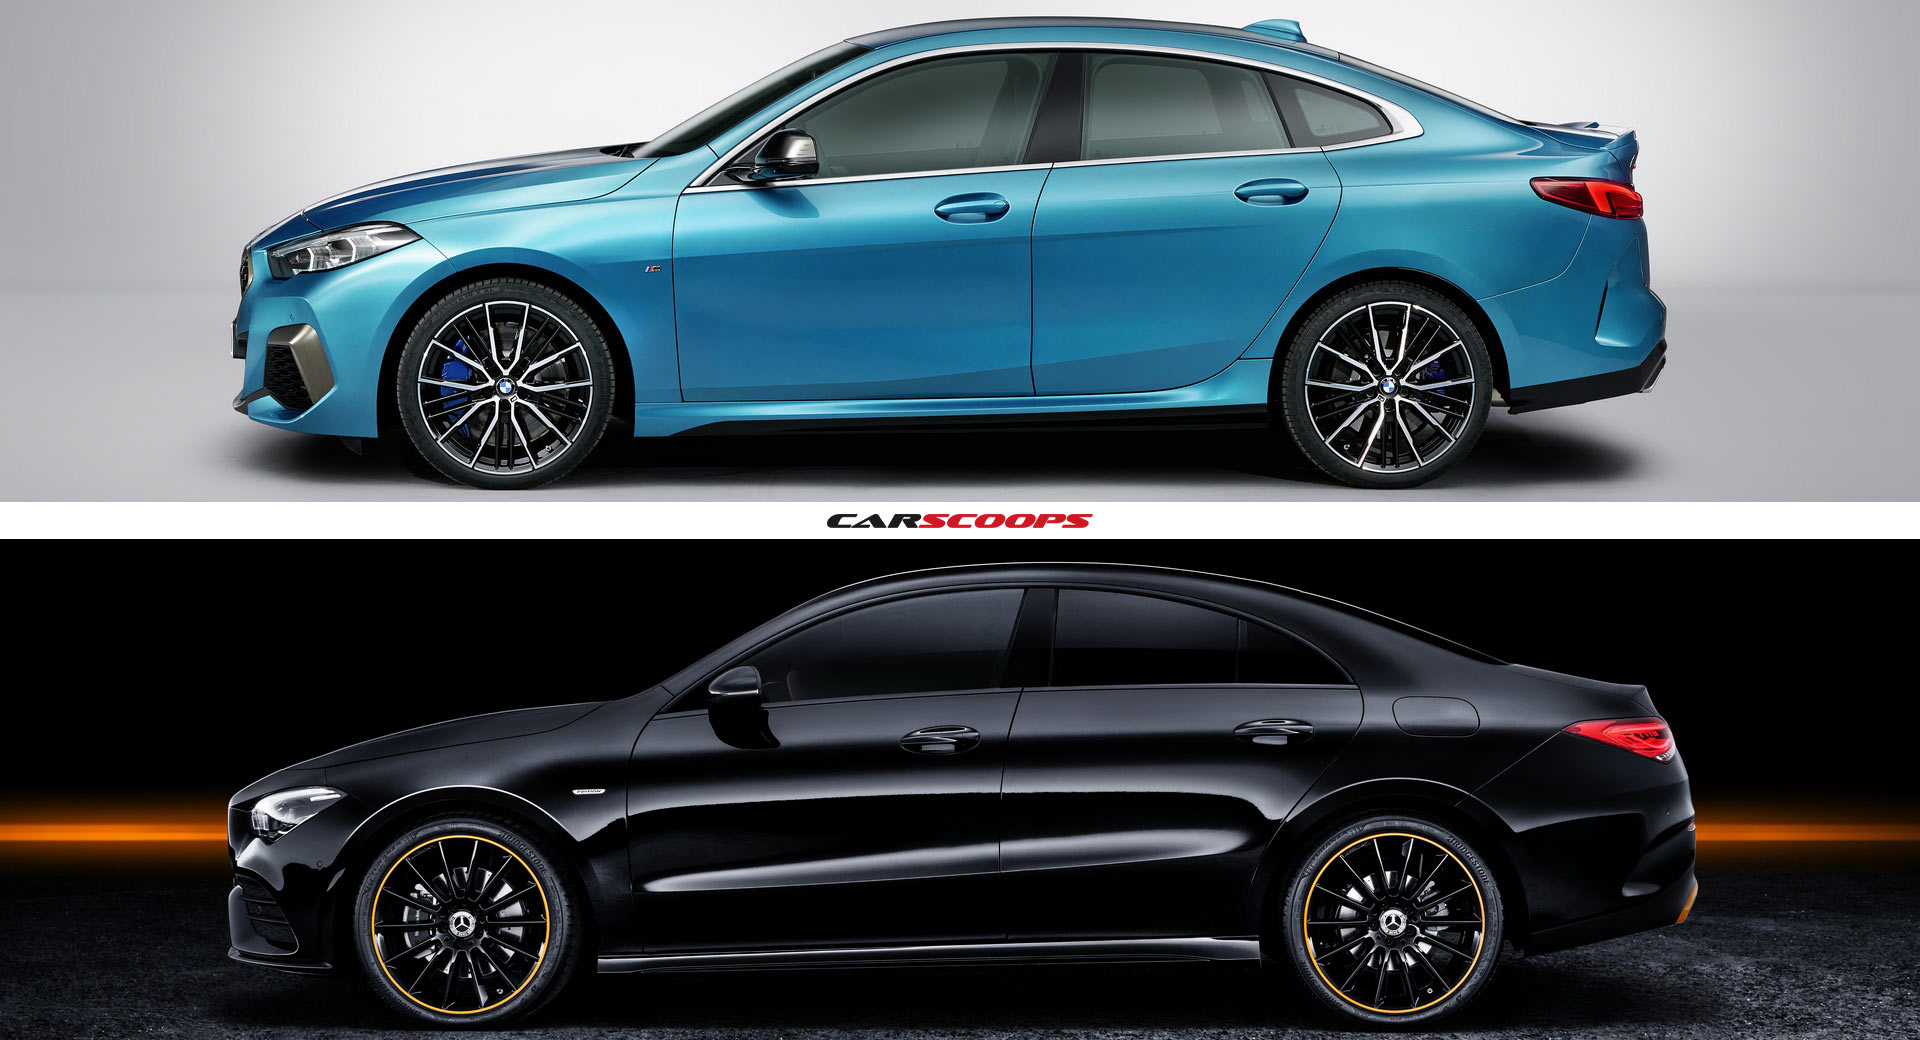 BMW 2 Series Gran Coupe breaks cover: To rival Mercedes-Benz CLA